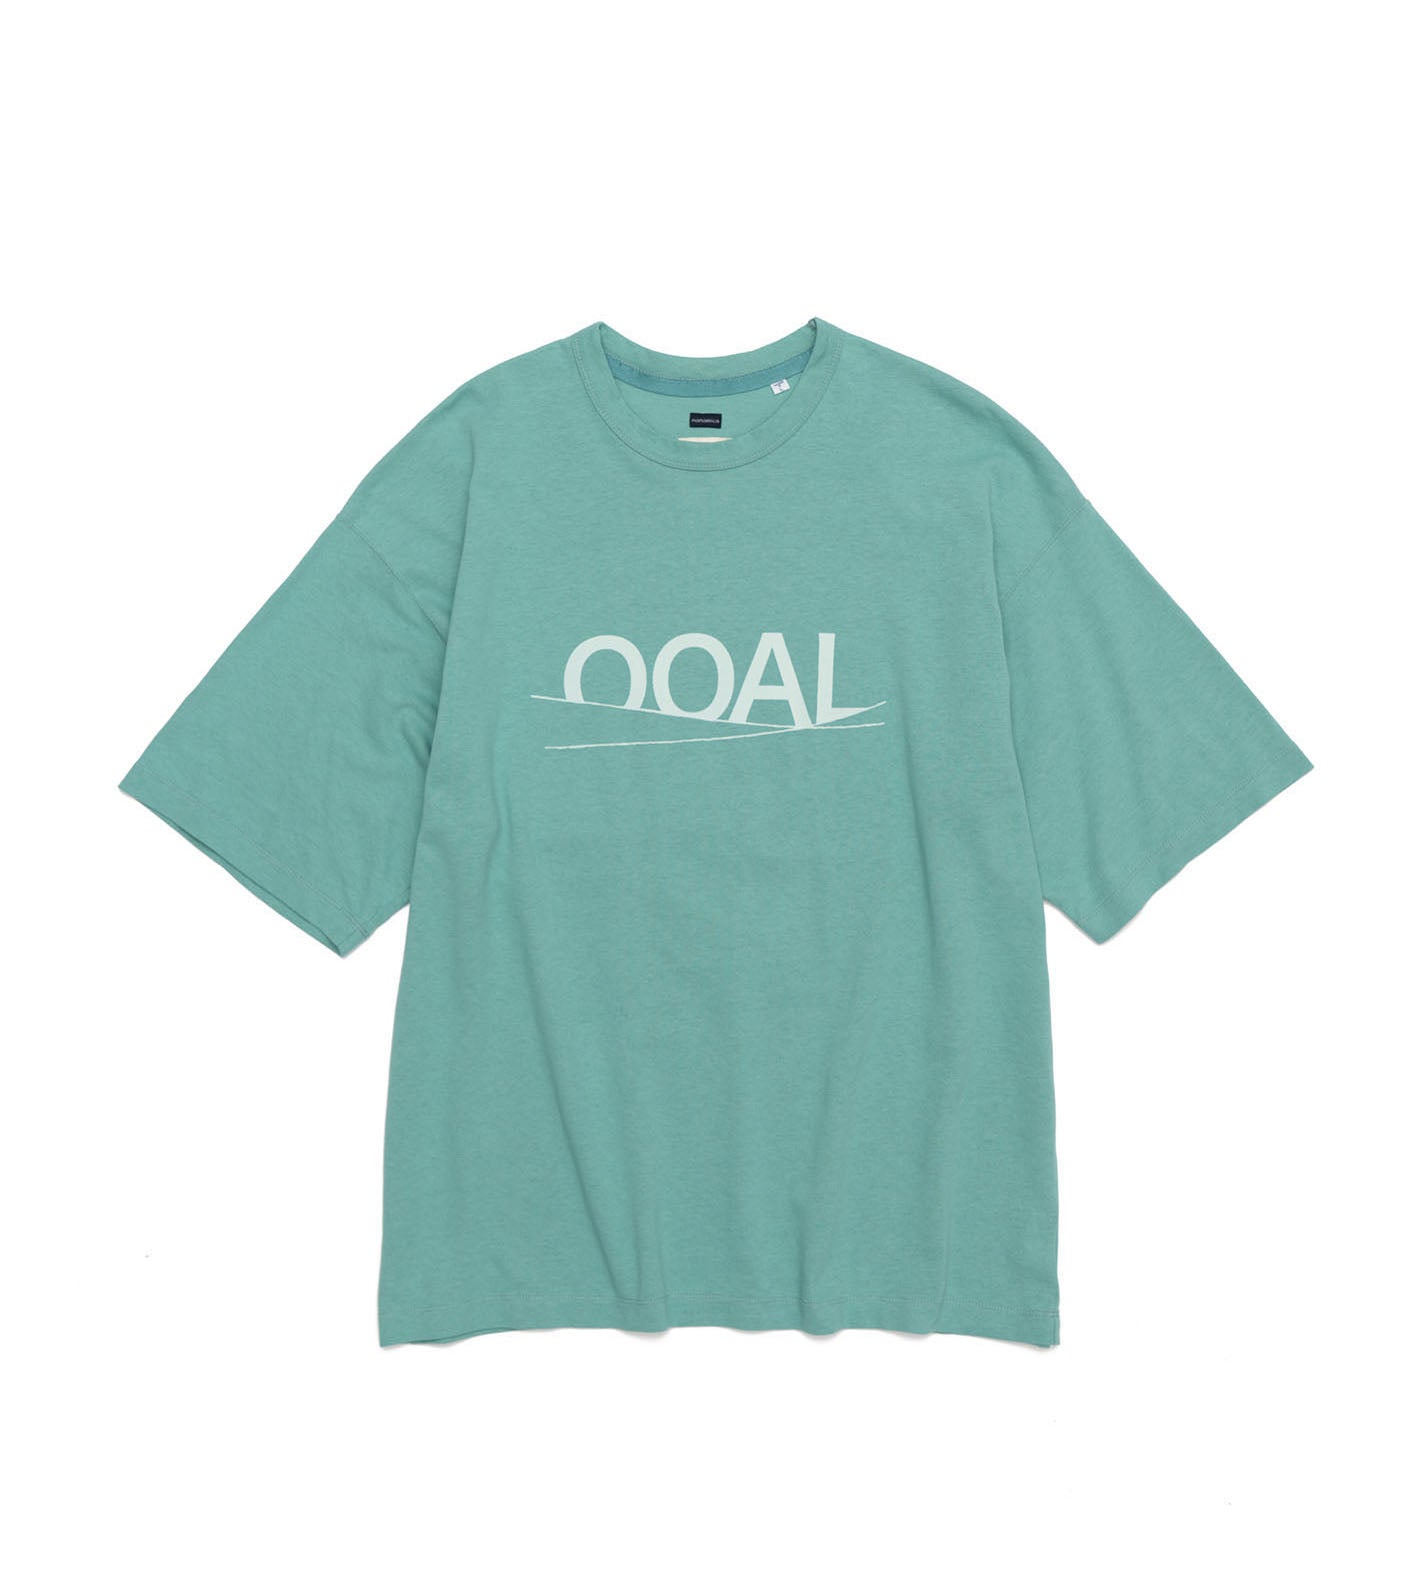 All Oversize Tees, Green